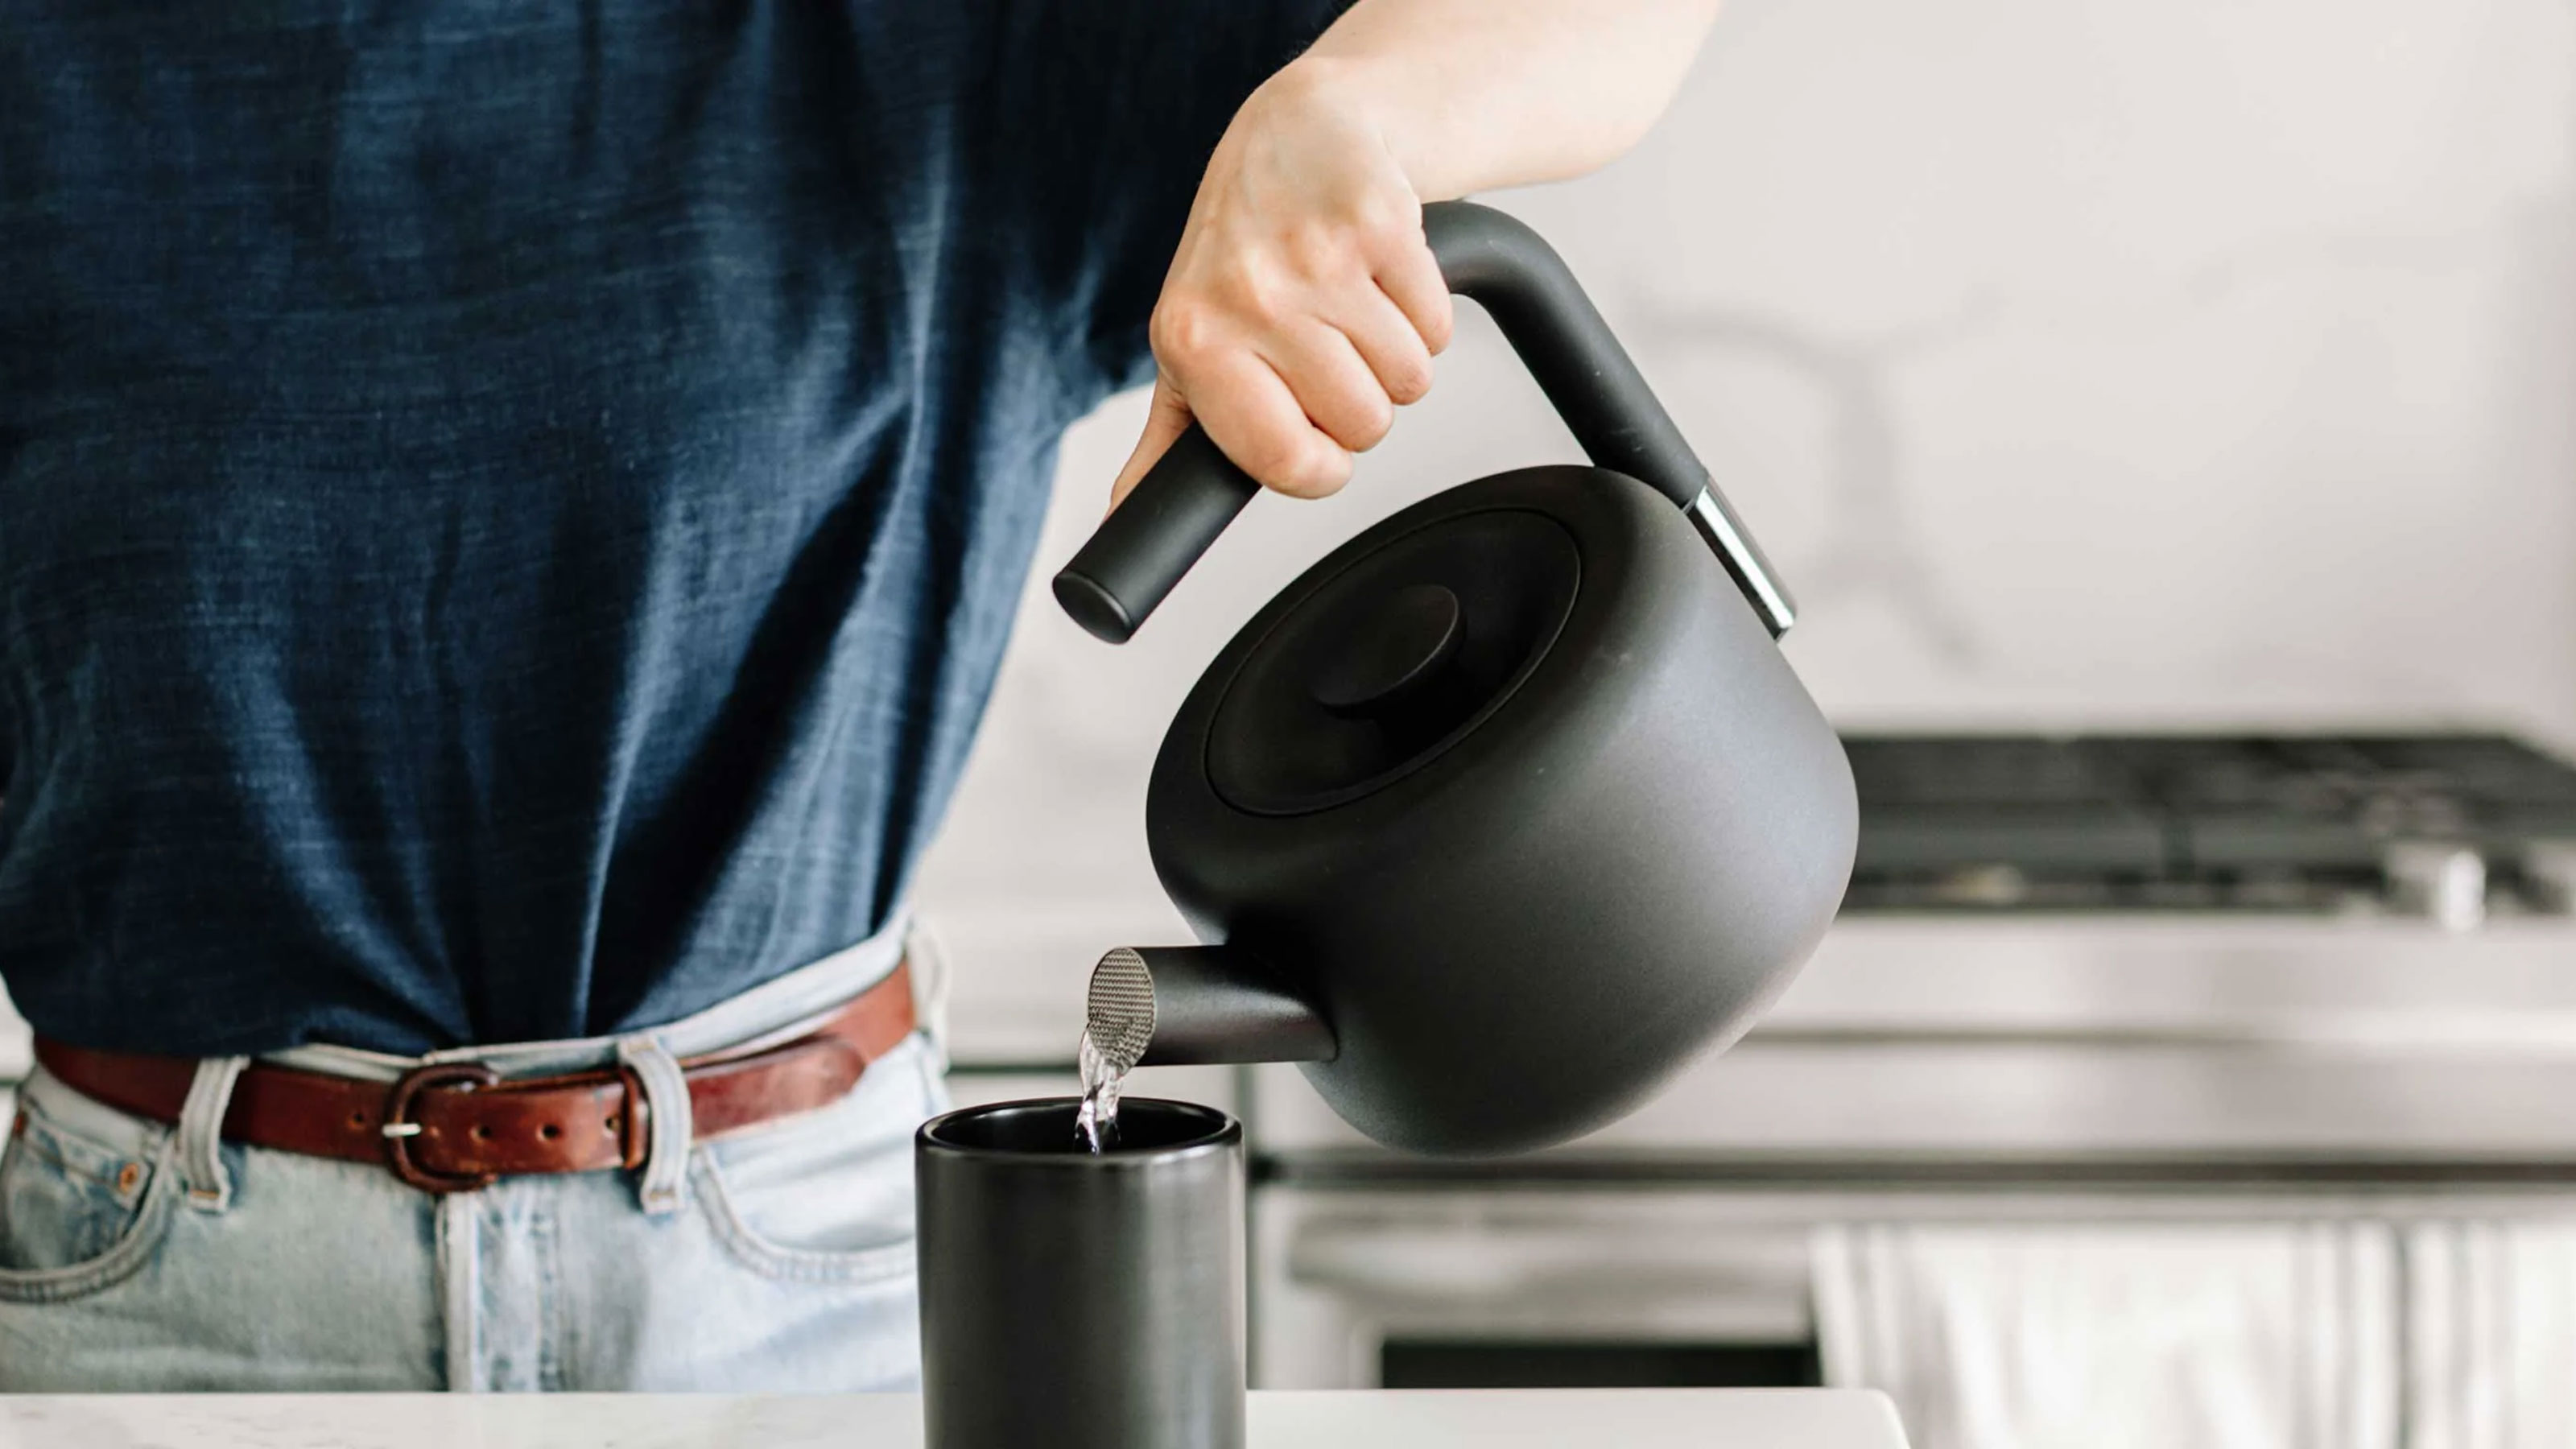 The Best Stovetop Kettles